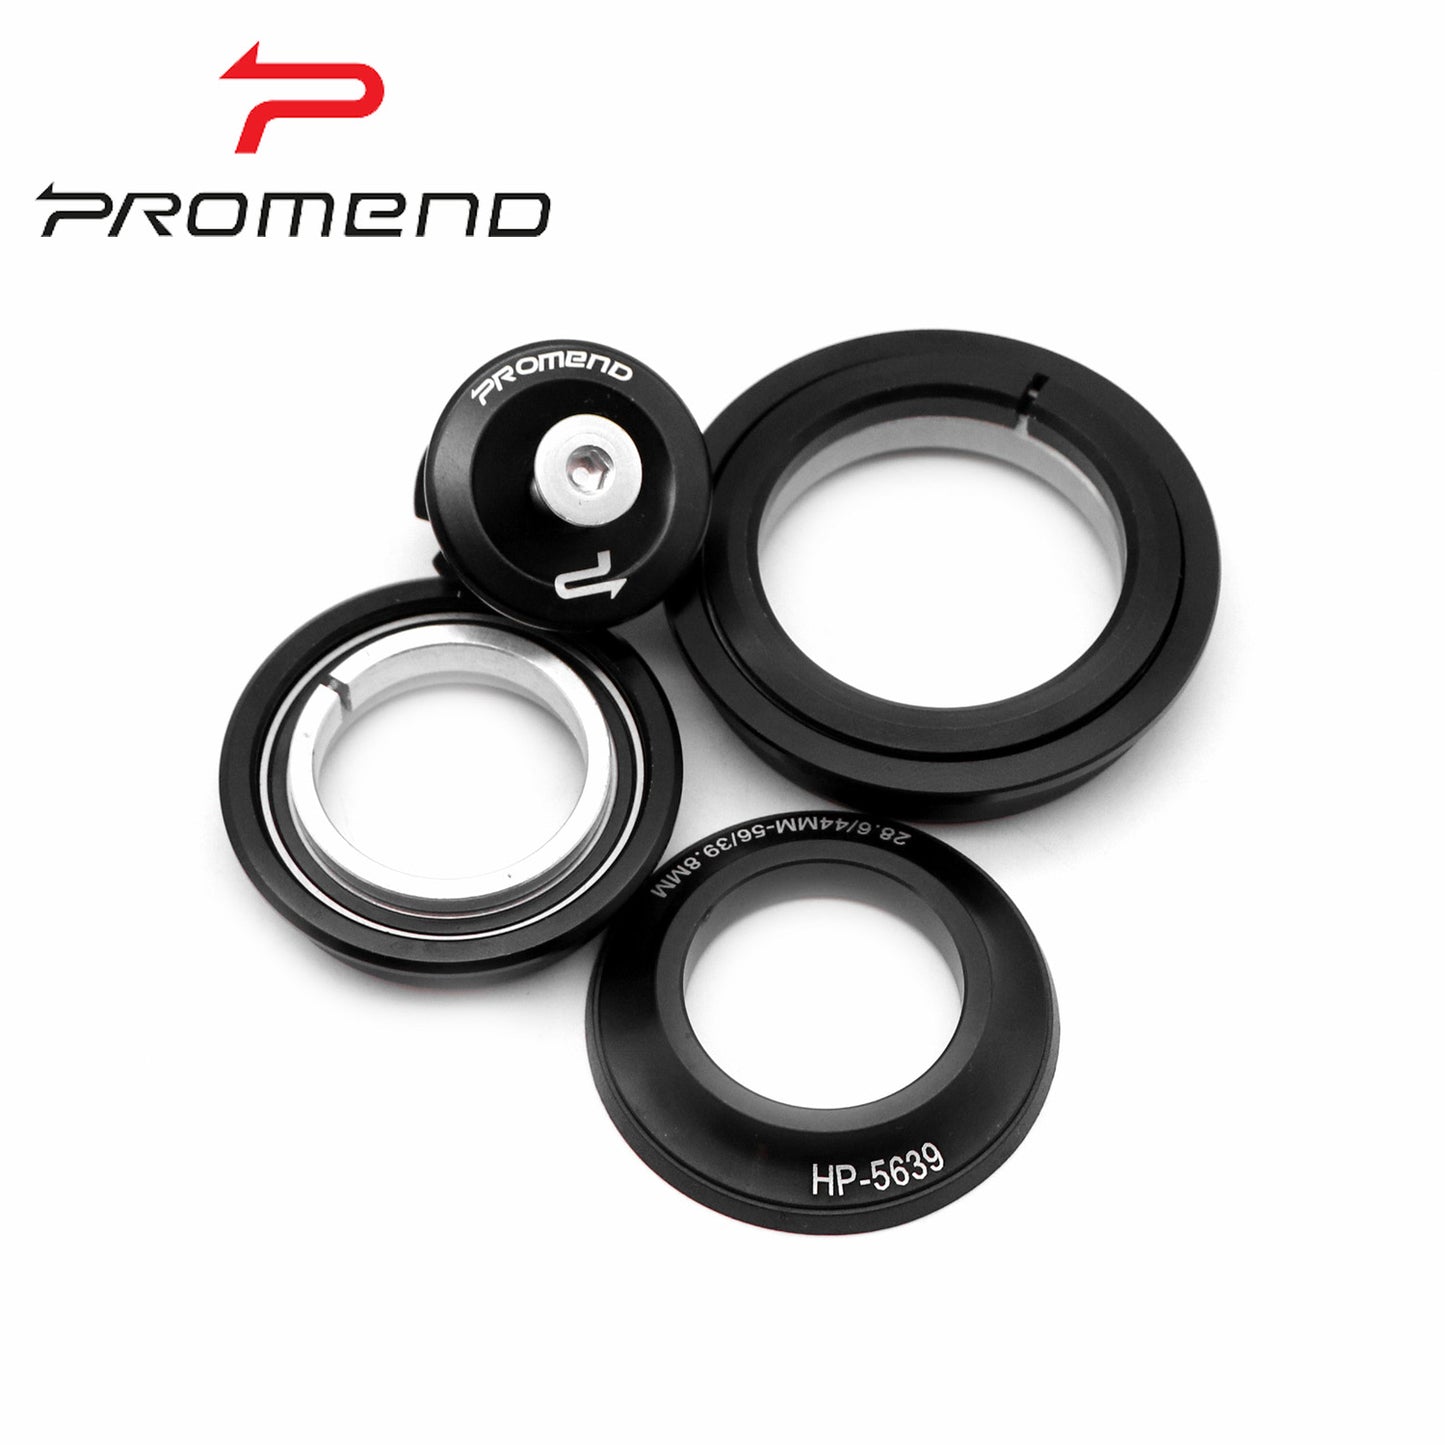 Promend HP-5639 MTB Aluminum Alloy Conical Bearing Bicycle Headset